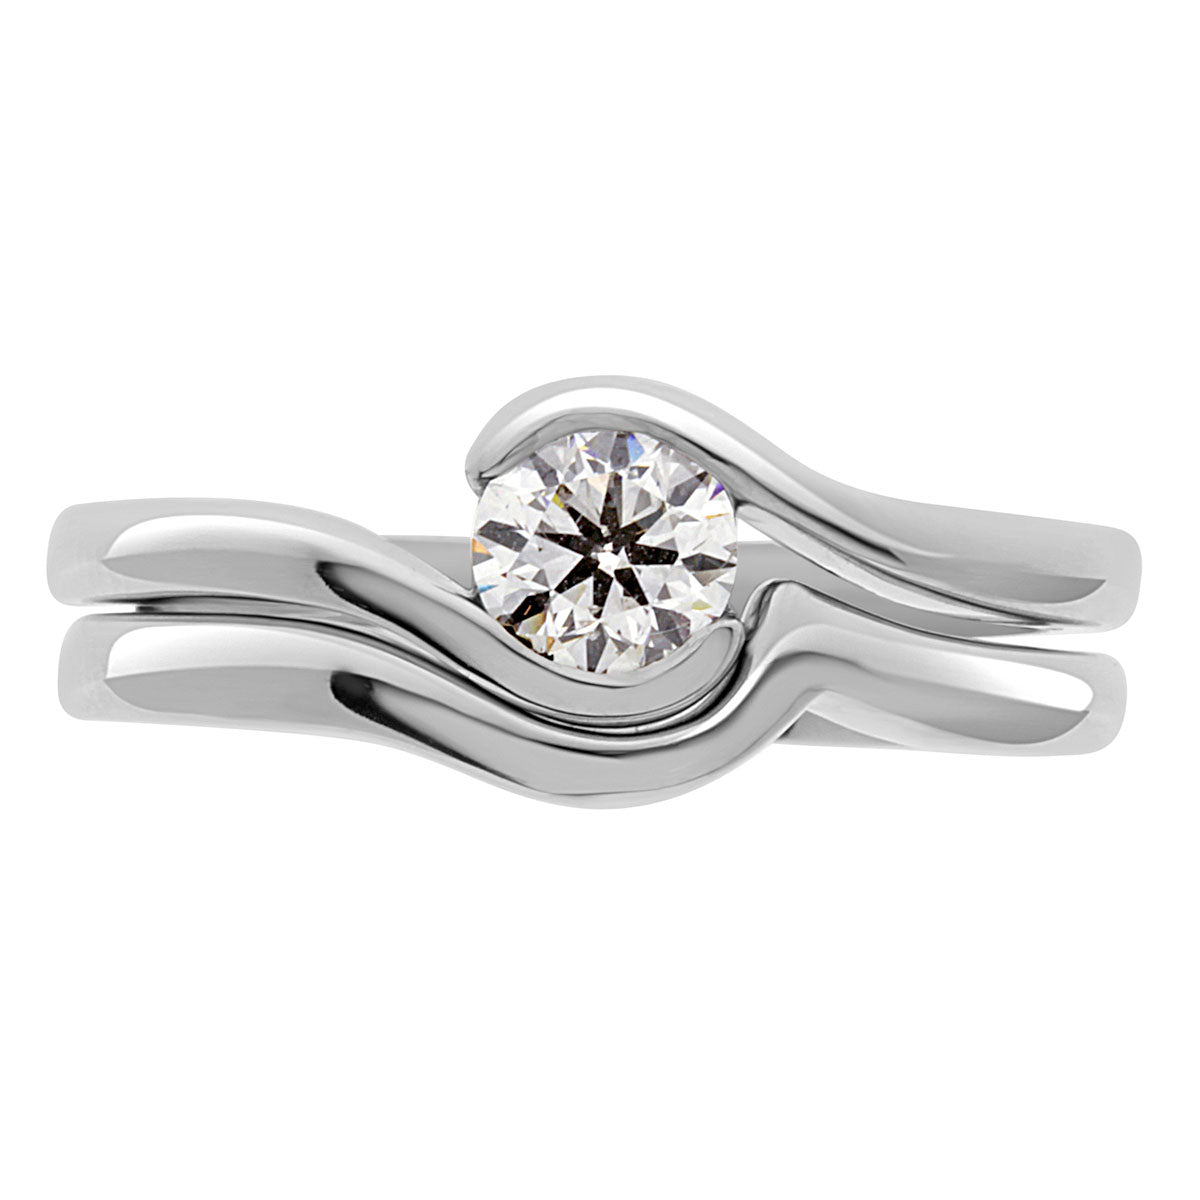 Tension Set Diamond Ring made in white gold with a matching wedding ring